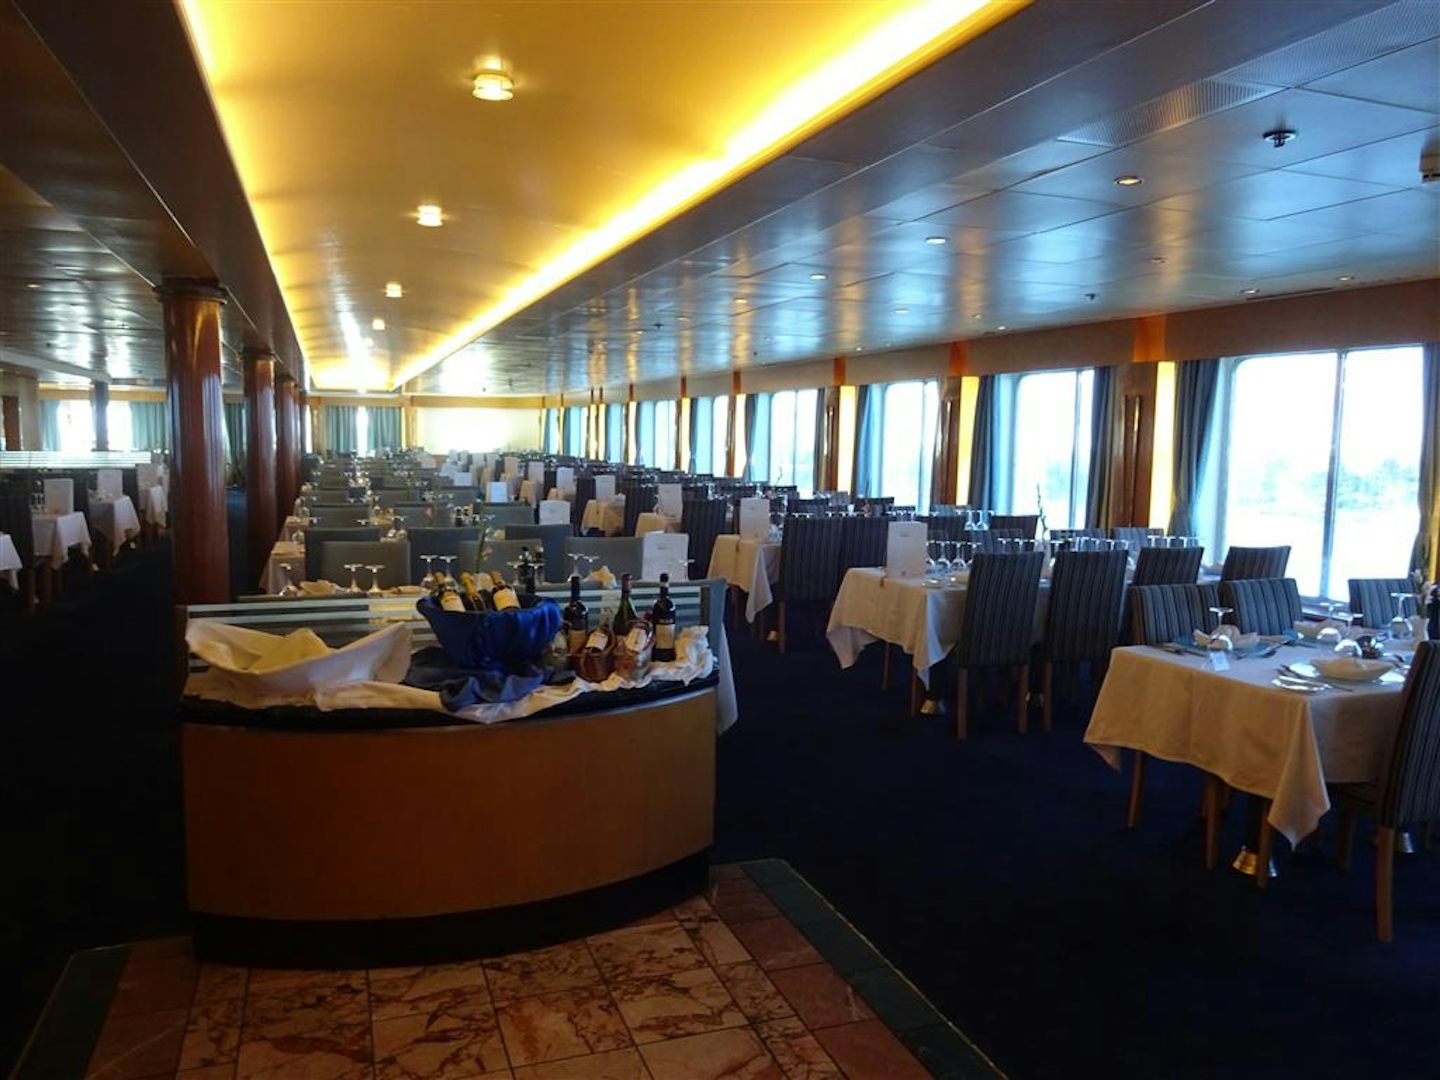 Amalthia Restaurant.  One of two main dining rooms on Decks 5 and 8.